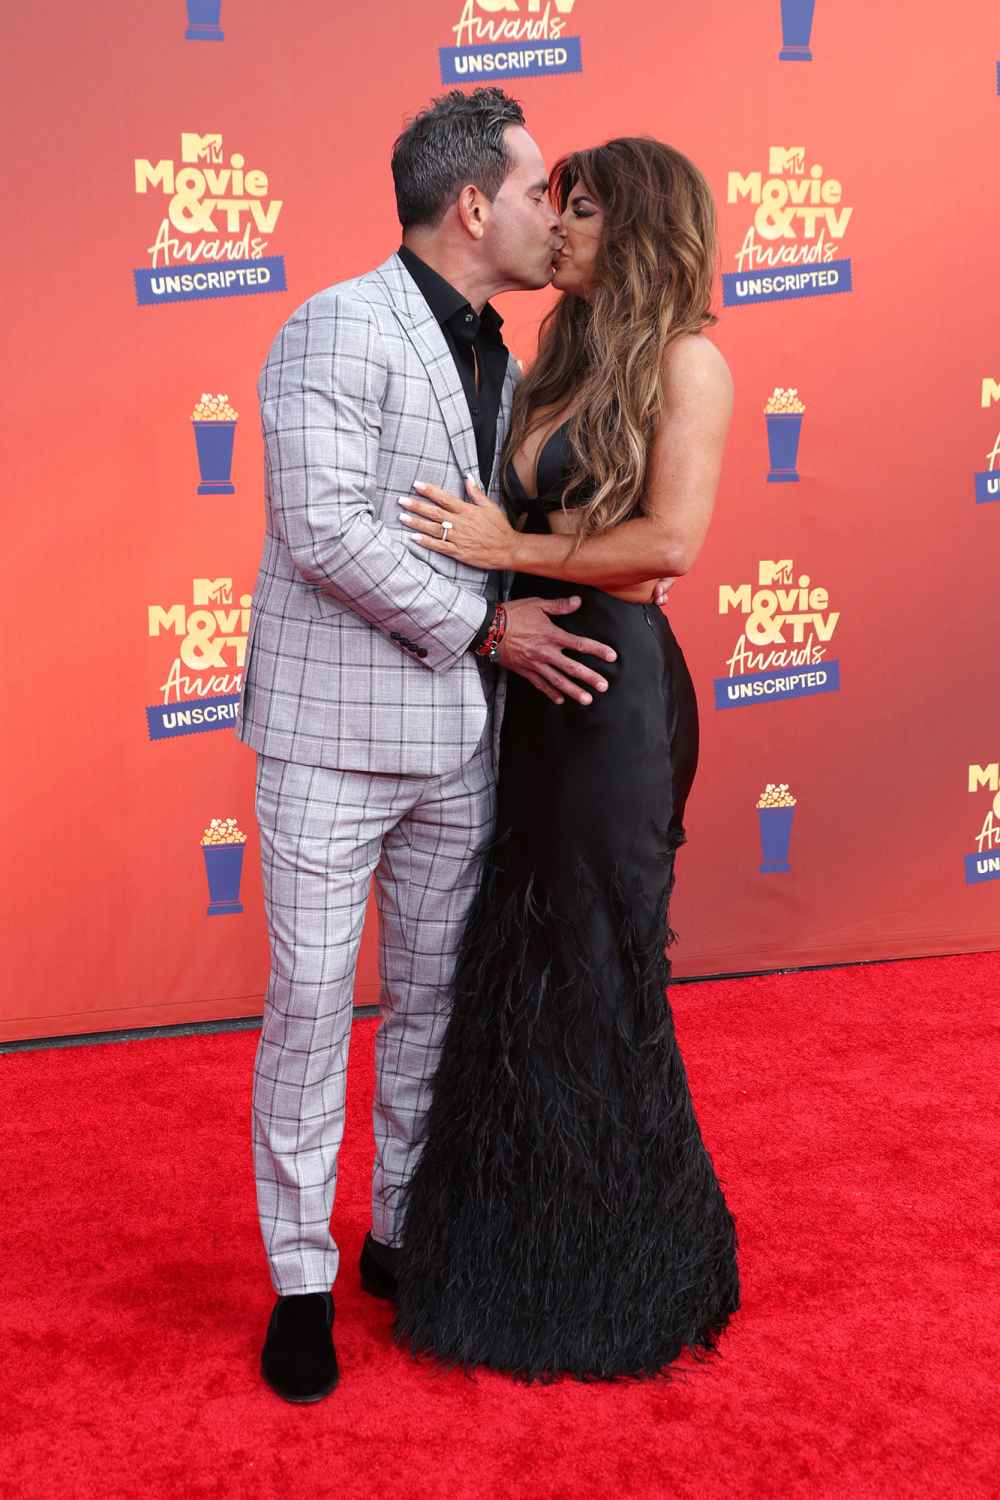 Luis Ruelas and Teresa Giudice Pack on PDA 2022 MTV Movie and TV Awards Unscripted